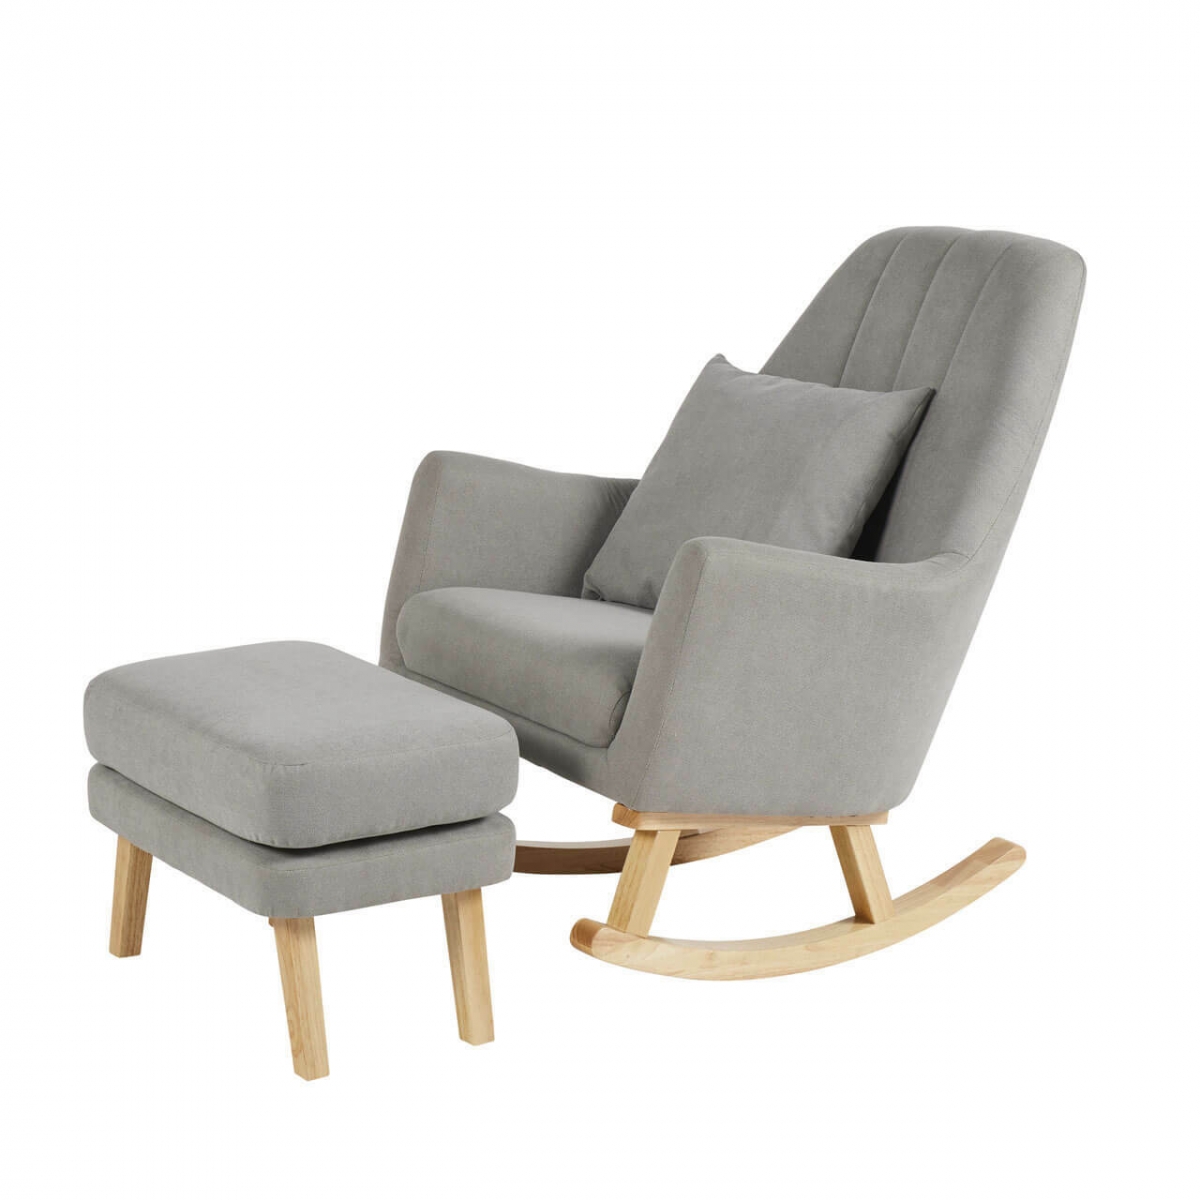 Ickle Bubba Eden Nursery Chair and Stool